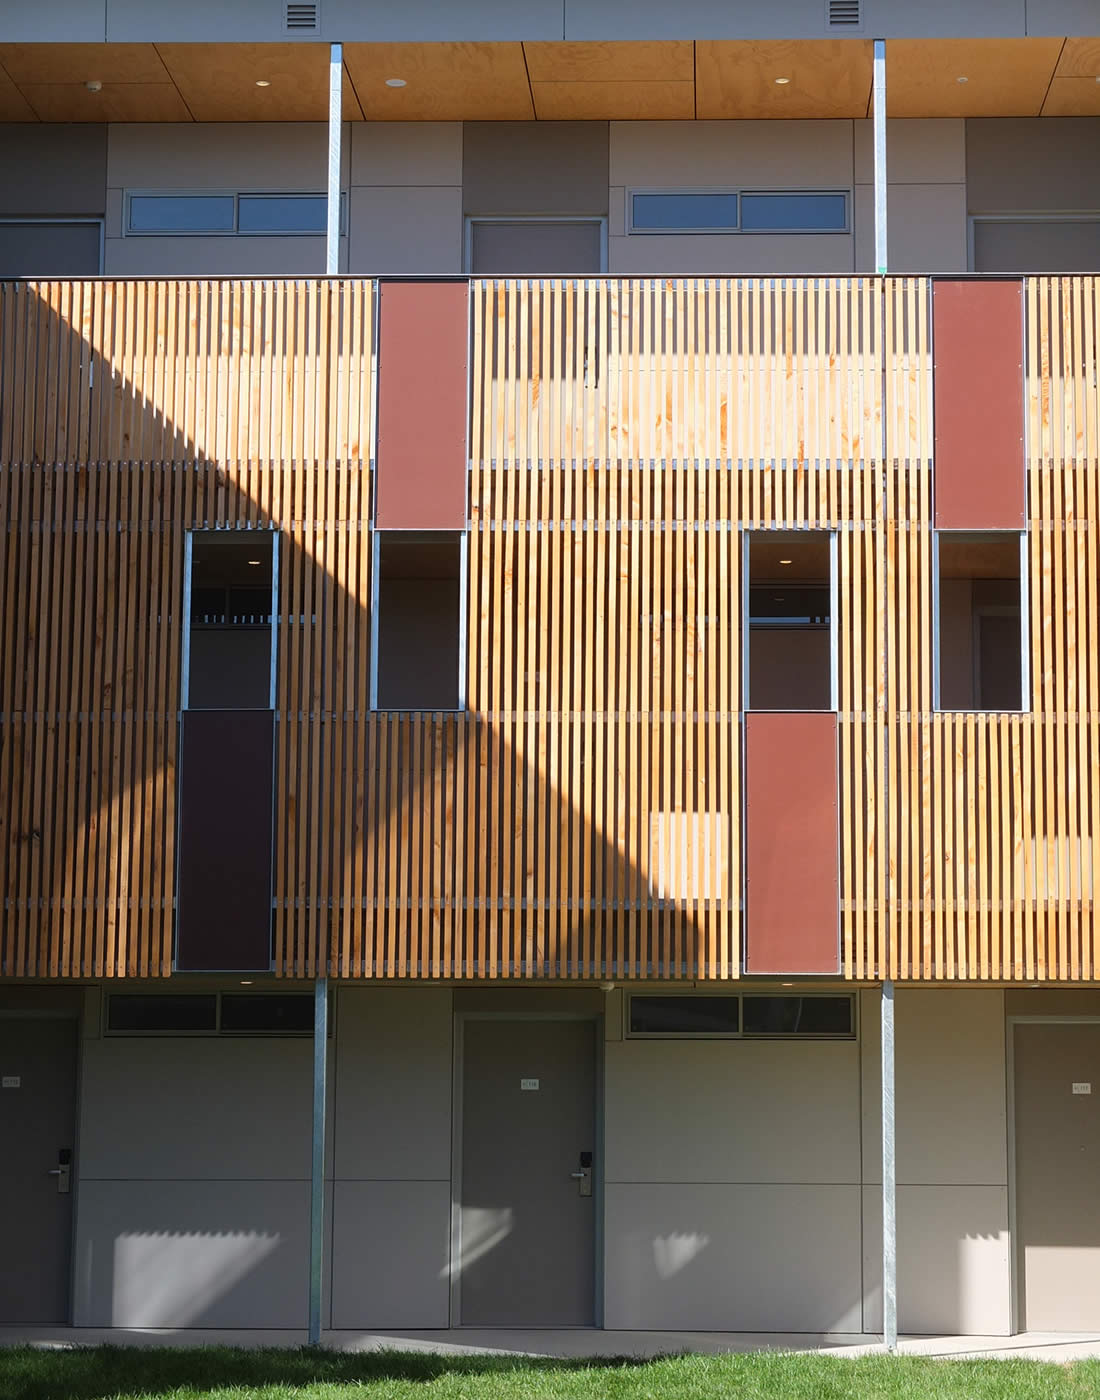 UTAS Newnham Student Residences, Tasmania: Rough sawn unfinished macrocarpa timber screens moderate the weather to open walkways and support crime prevention through environmental design (CPTED) principles. Photo by Morrison & Breytenbach Architects.